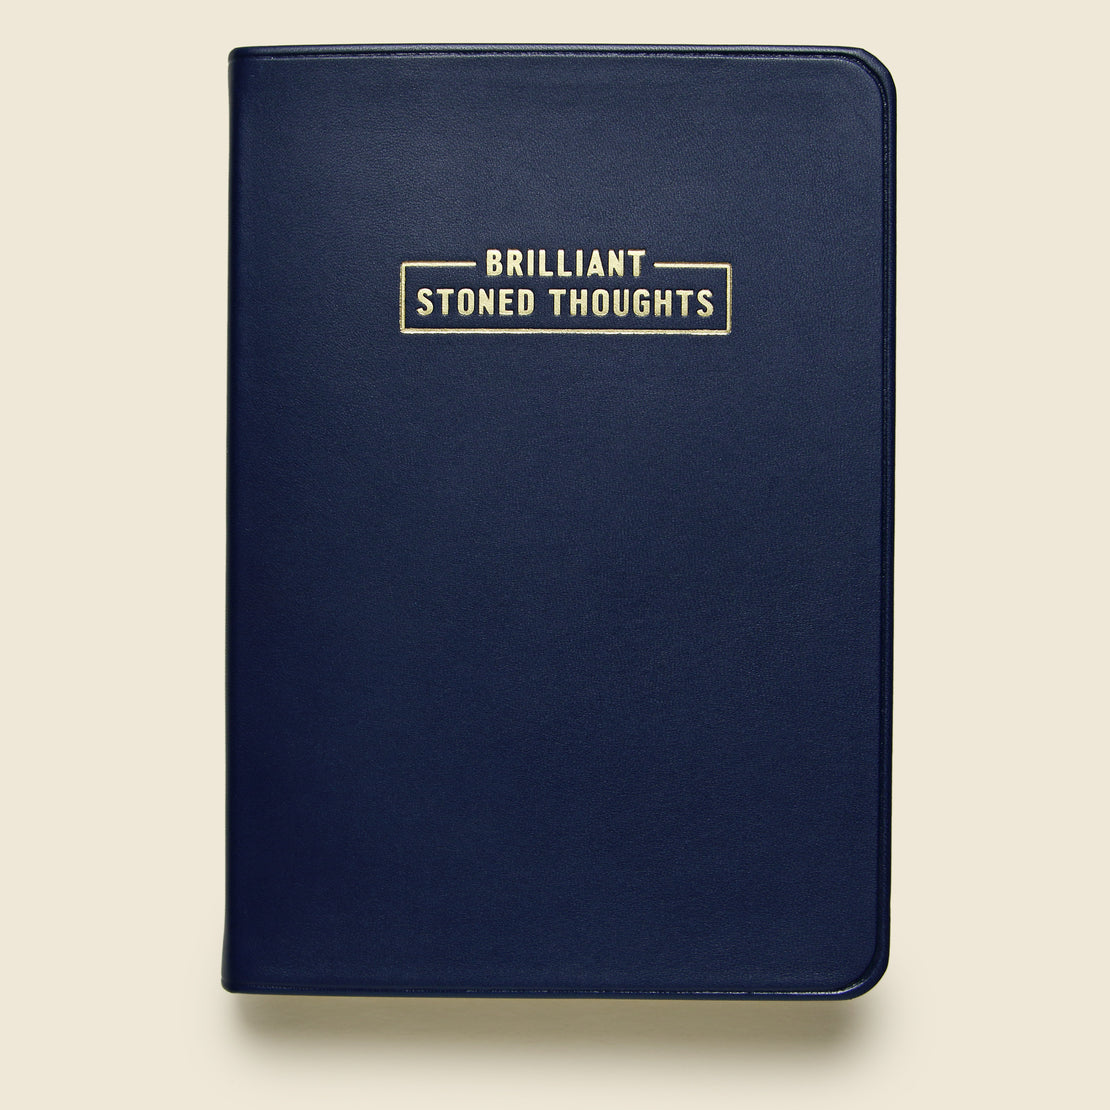 Paper Goods Notebook - "Brilliant Stoned Thoughts"